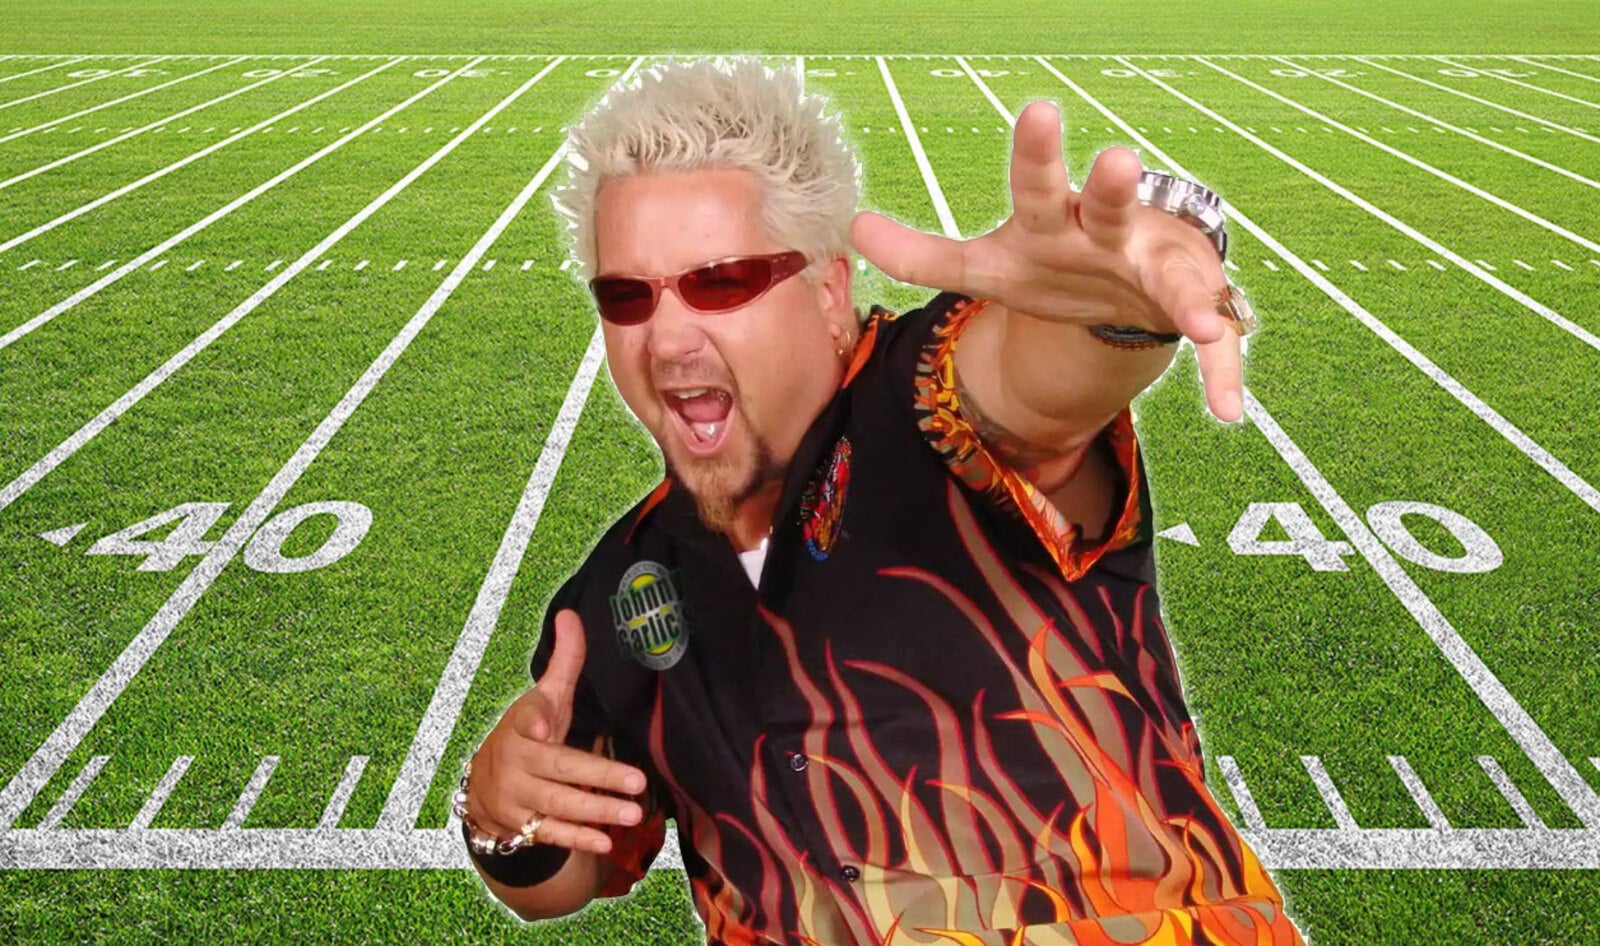 The Vegan Options Are Off the Charts for Guy Fieri's Massive Flavortown Super Bowl Party